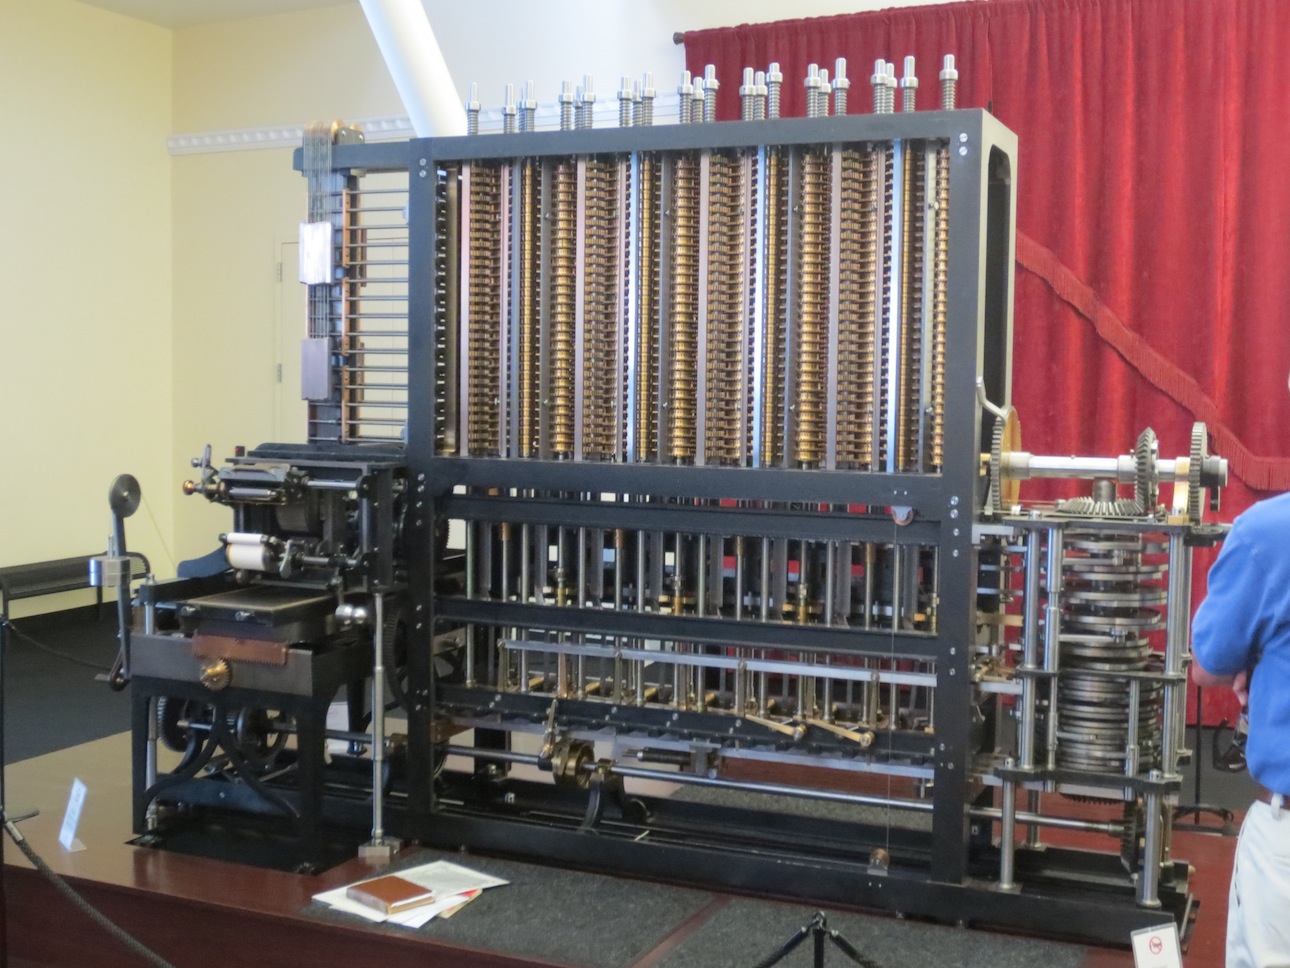 Working model of Charles Babbage's Difference Engine.